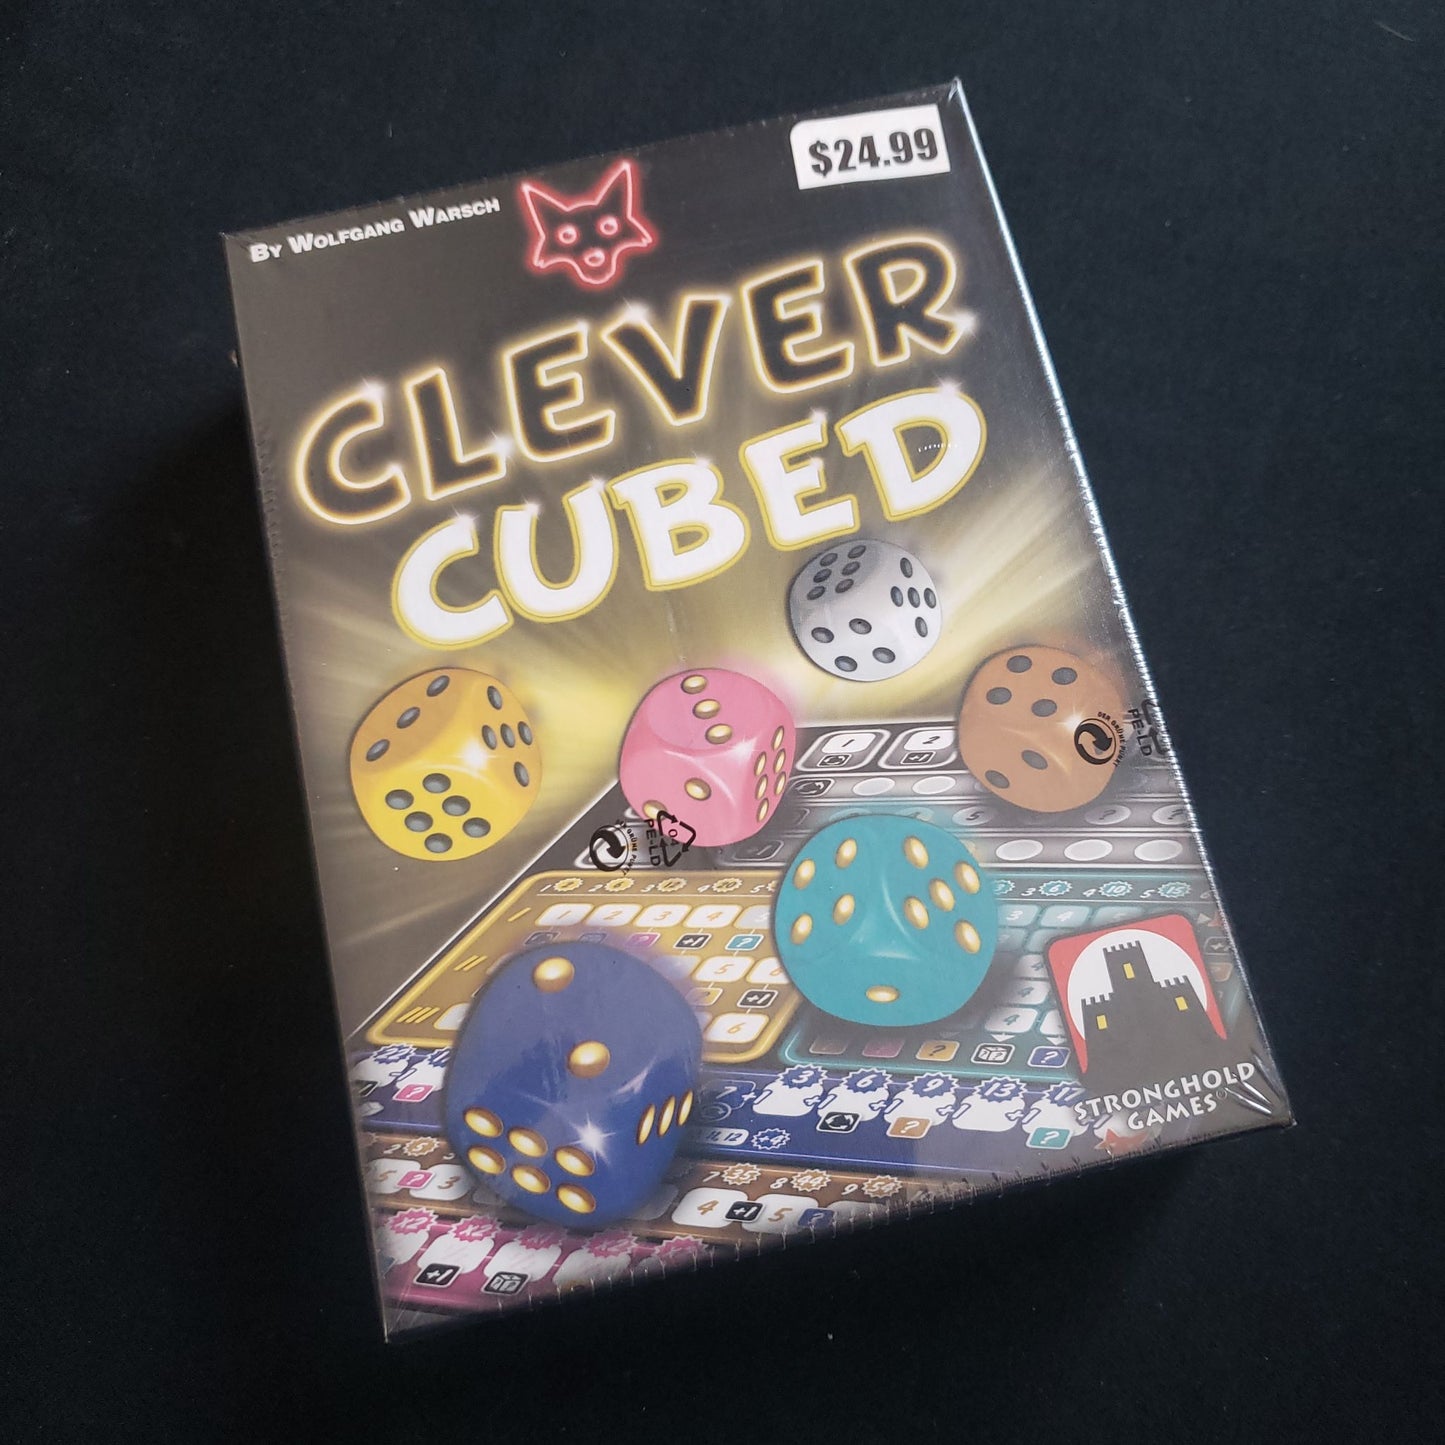 Image shows the front cover of the box of the Clever Cubed dice game